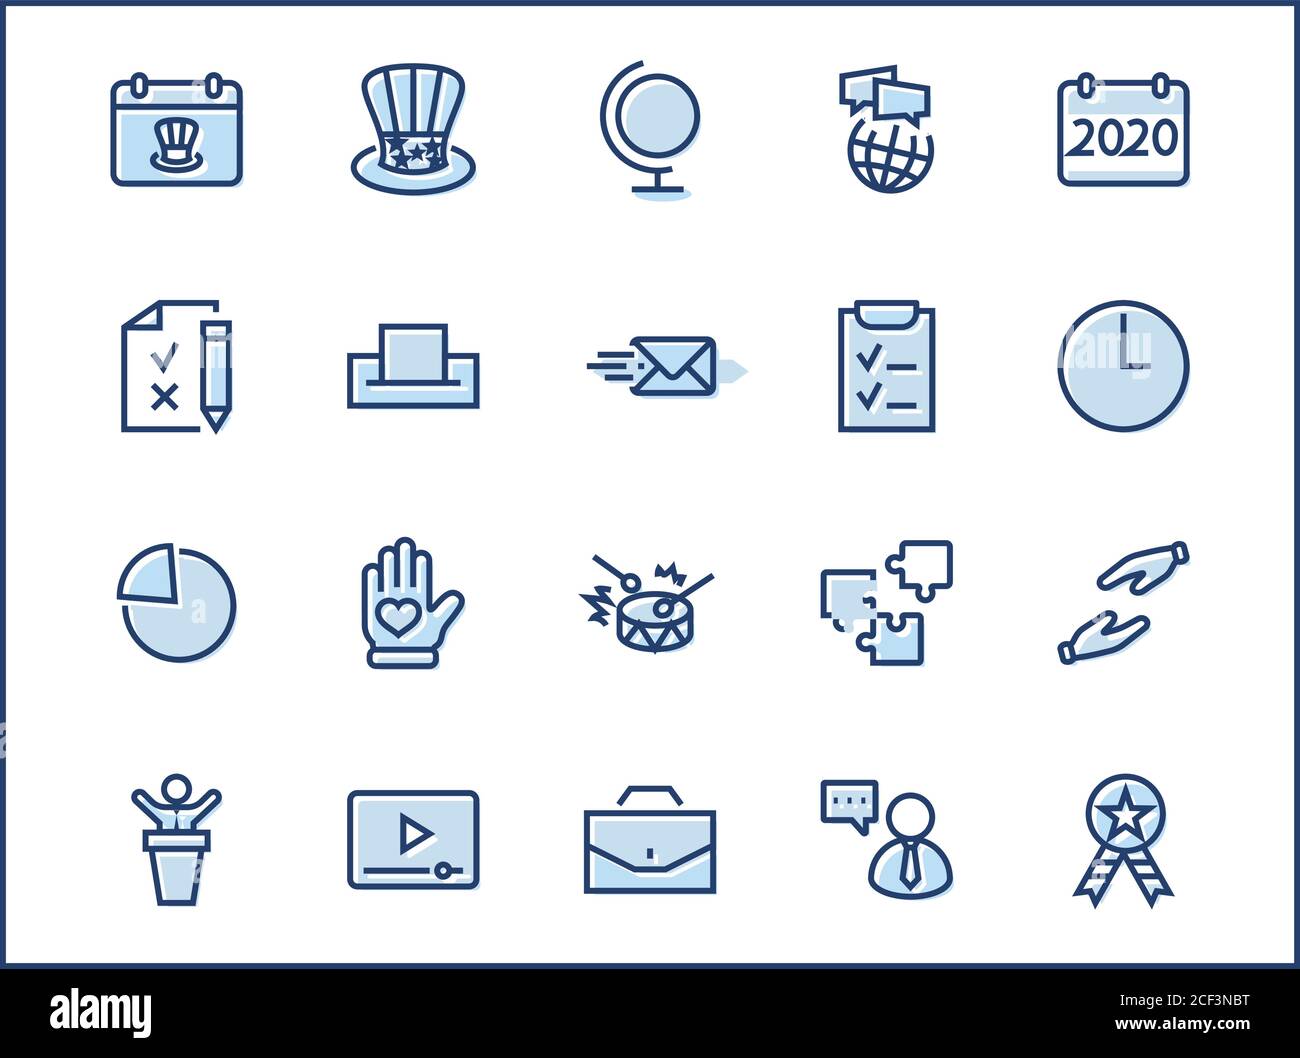 International Presidents Day Set Line Vector Icons. Contains such Icons as Hat, President, Voting, USA, Flag, Elections, Government, Ballot, Box, Chec Stock Vector